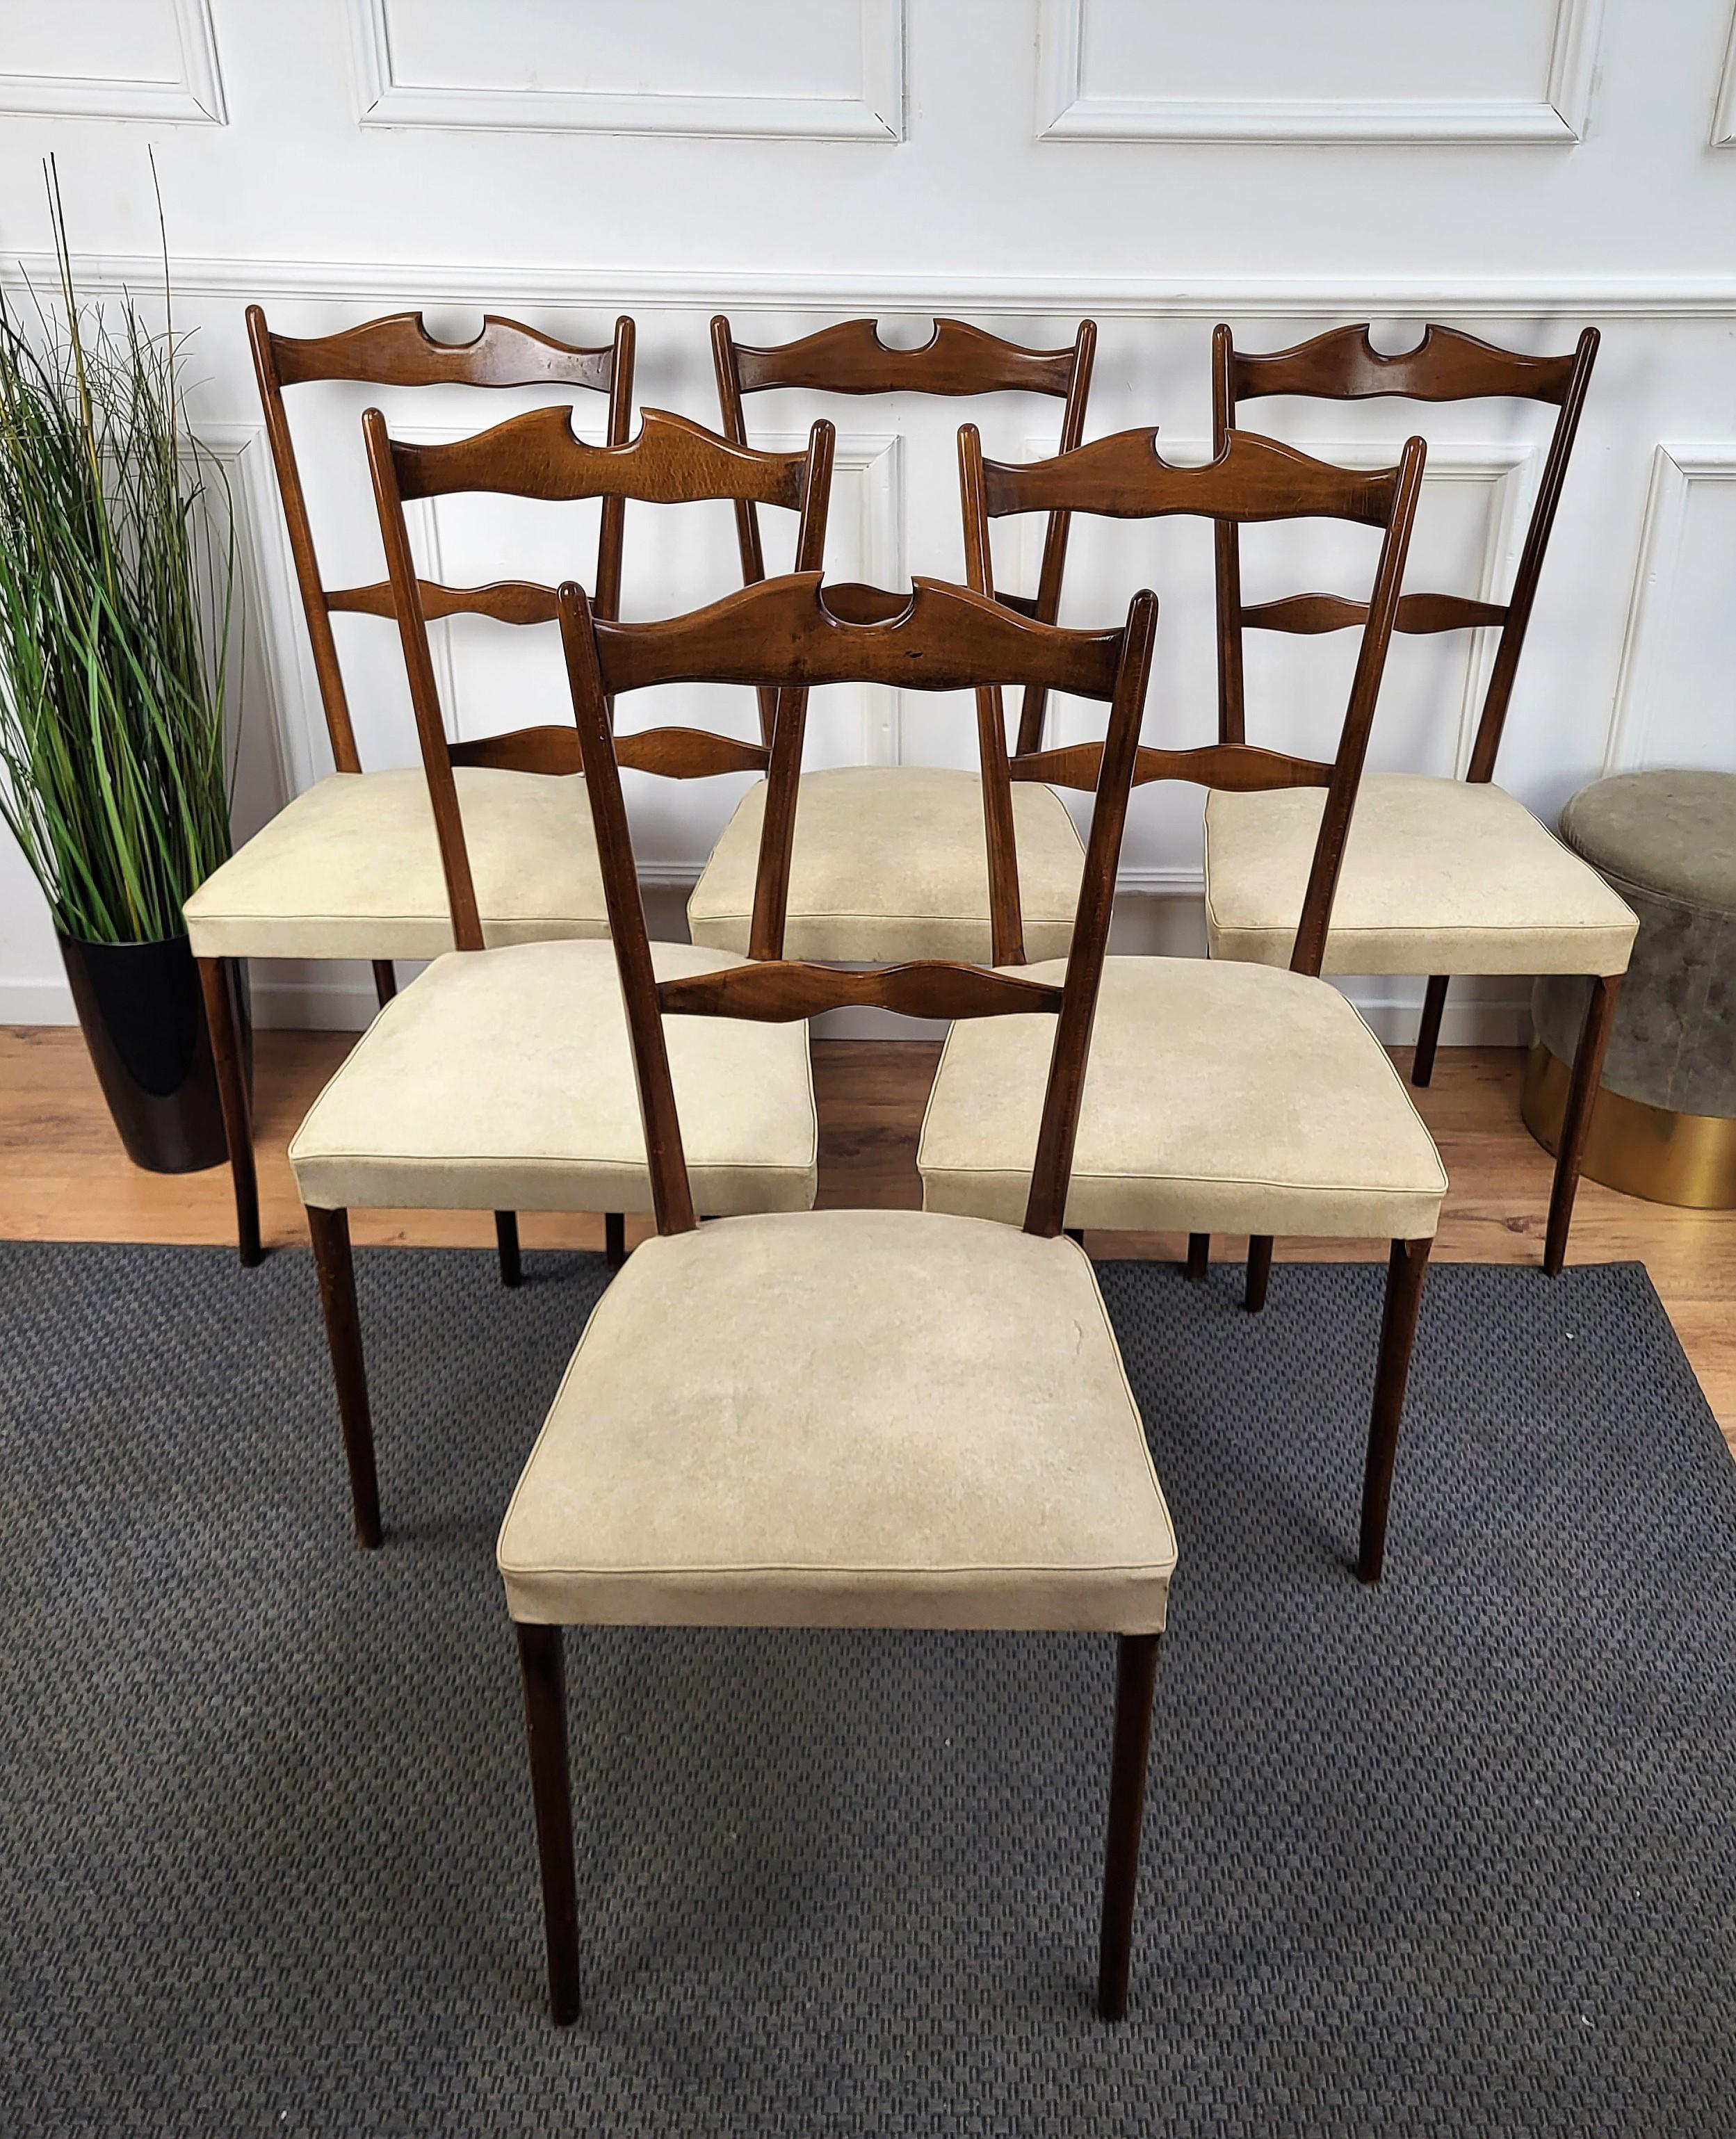 Very elegant Italian Mid-Century Modern set of 6 dining chairs, with greatly shaped wooden structure and upholstered seat. The unique and typical design, with the clean geometric shape and decoration enrich the natural pattern and grain of the wood